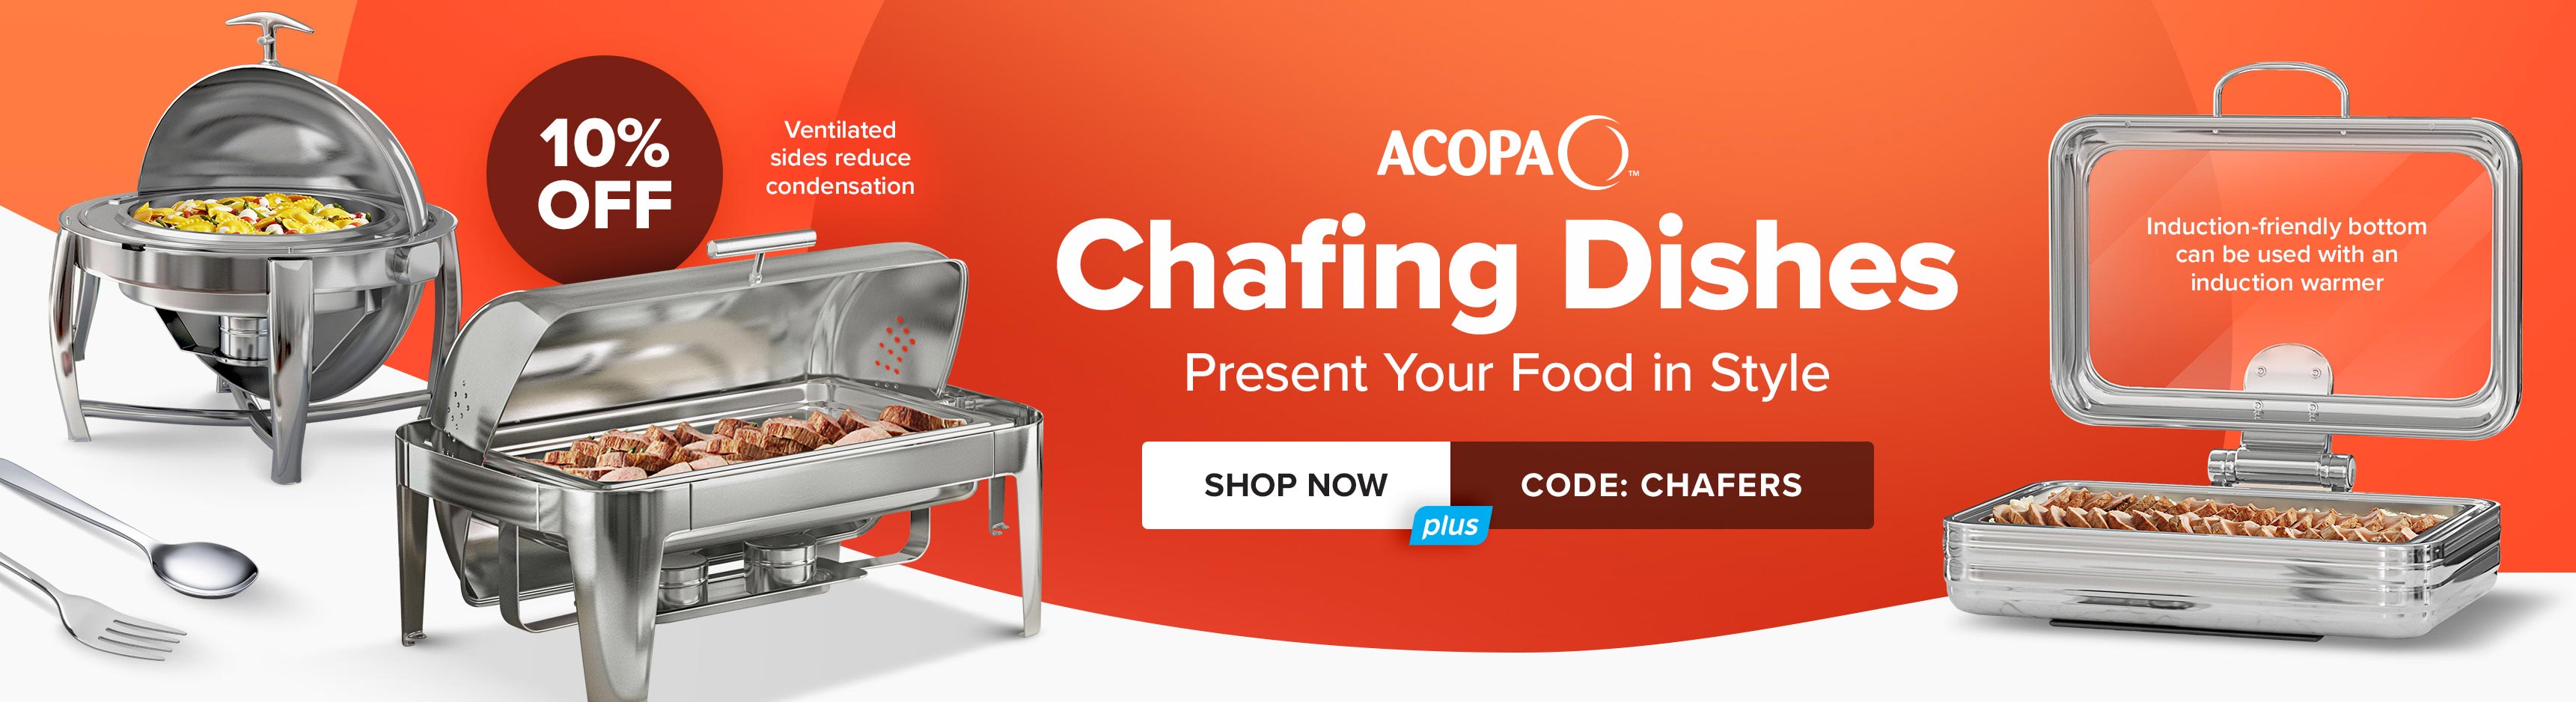 Acopa Chafing Dishes are 10% Off for a Limited Time